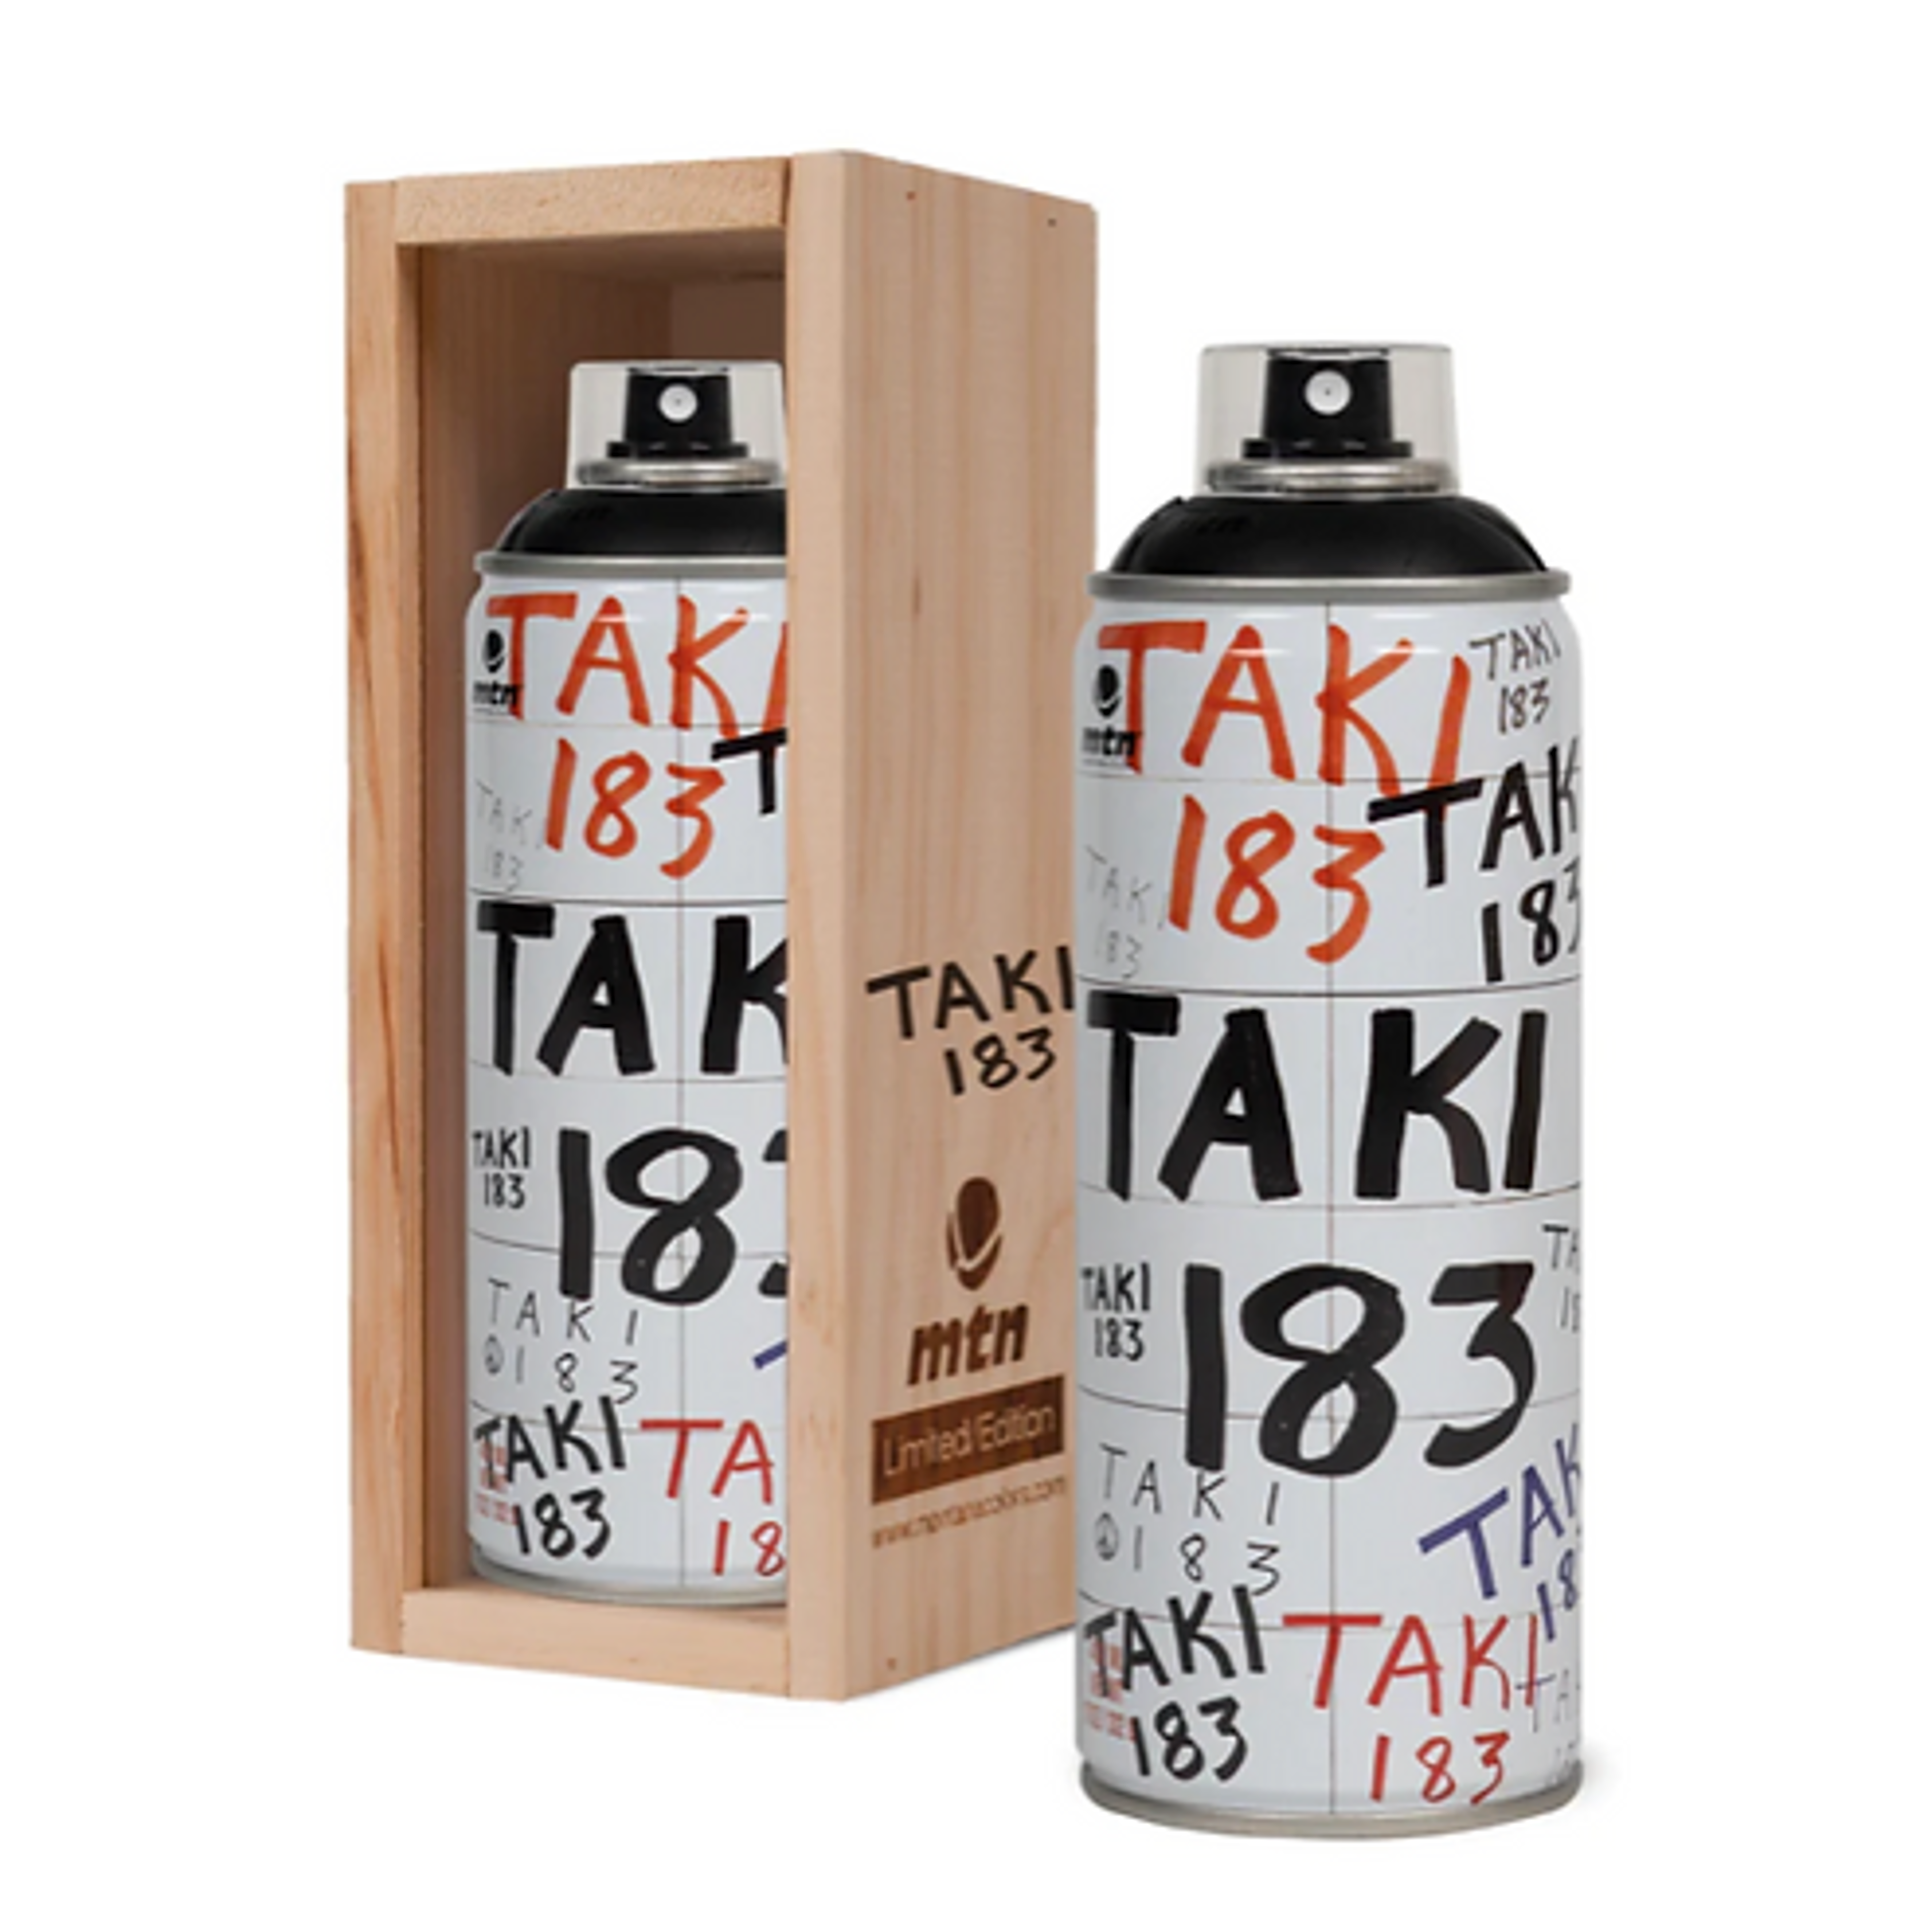 Taki 183 Collectors Spray Paint Can